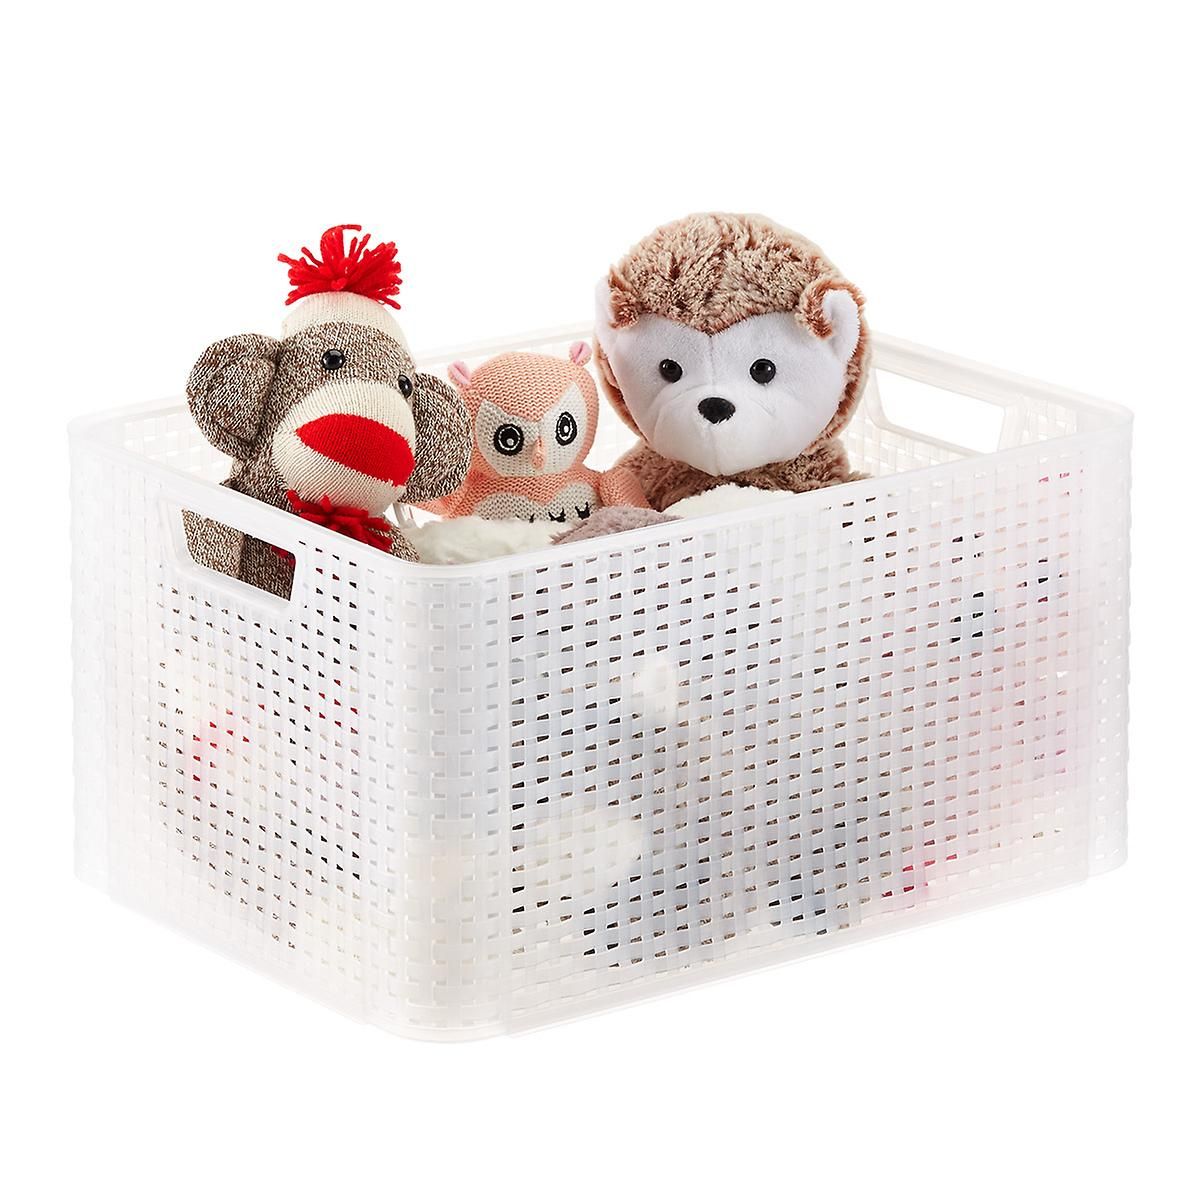 Curver White Basketweave Storage Bin with Handles | The Container Store